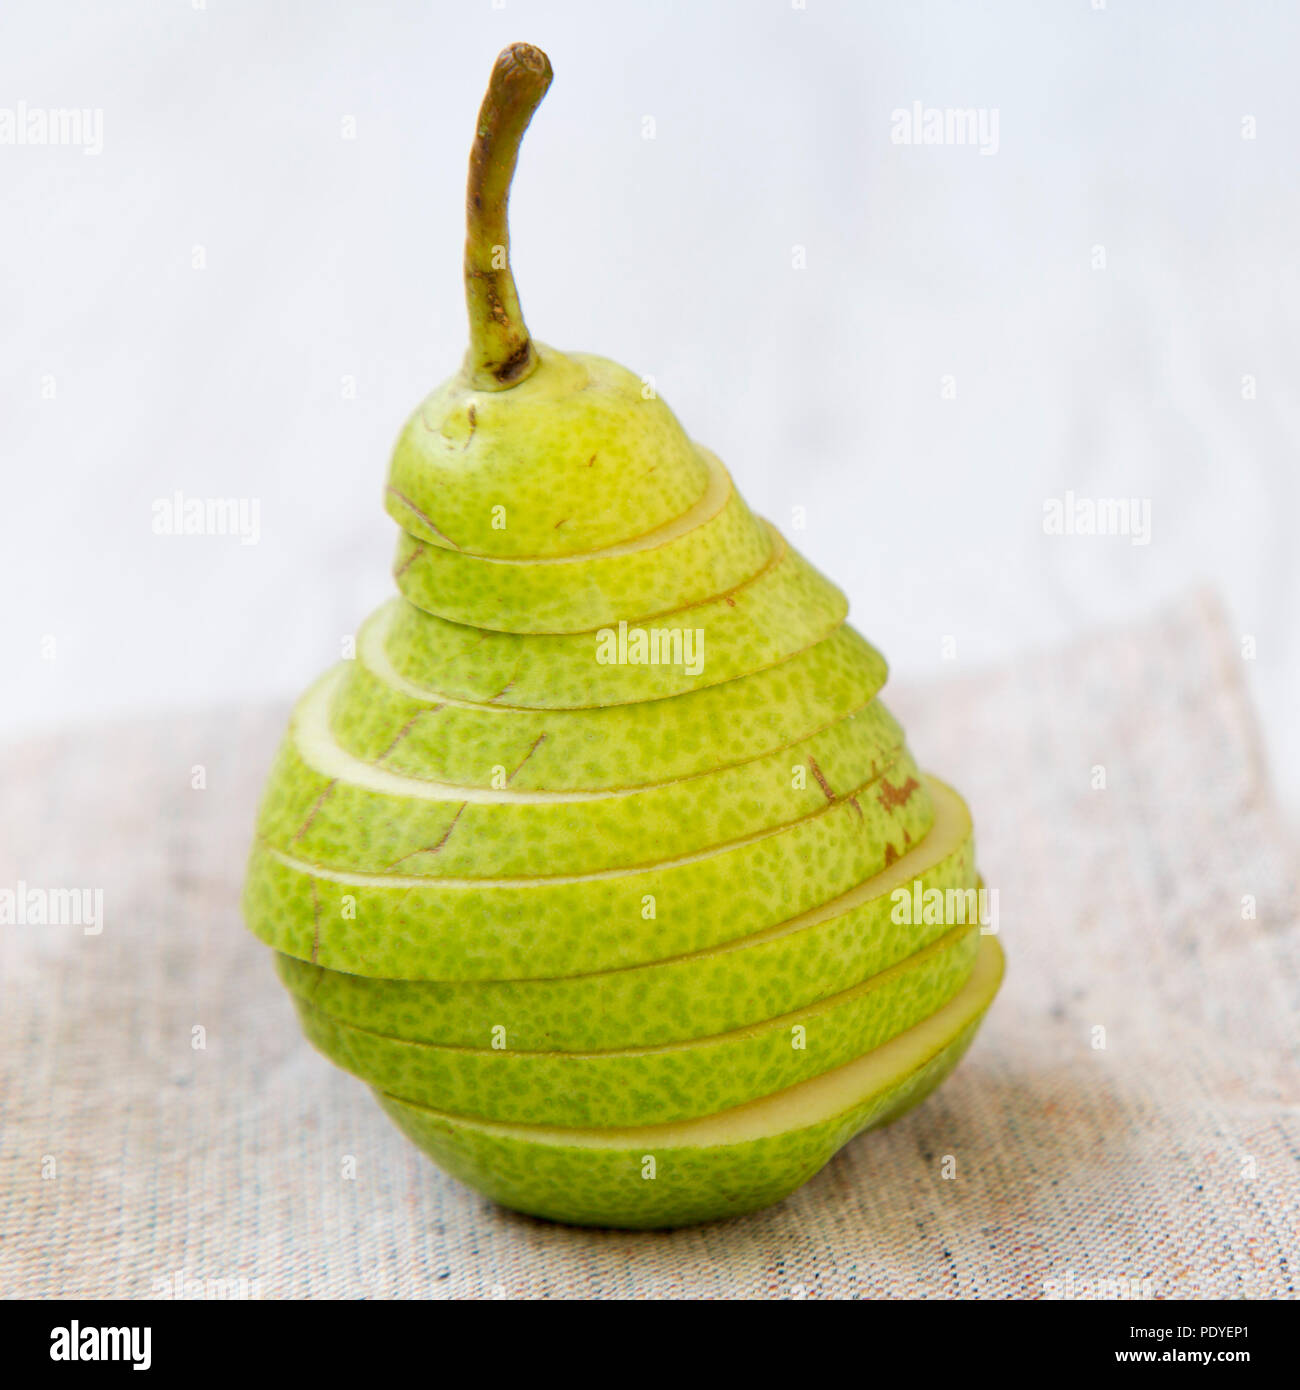 Sliced fresh pear on cloth, closeup. Side view. Stock Photo